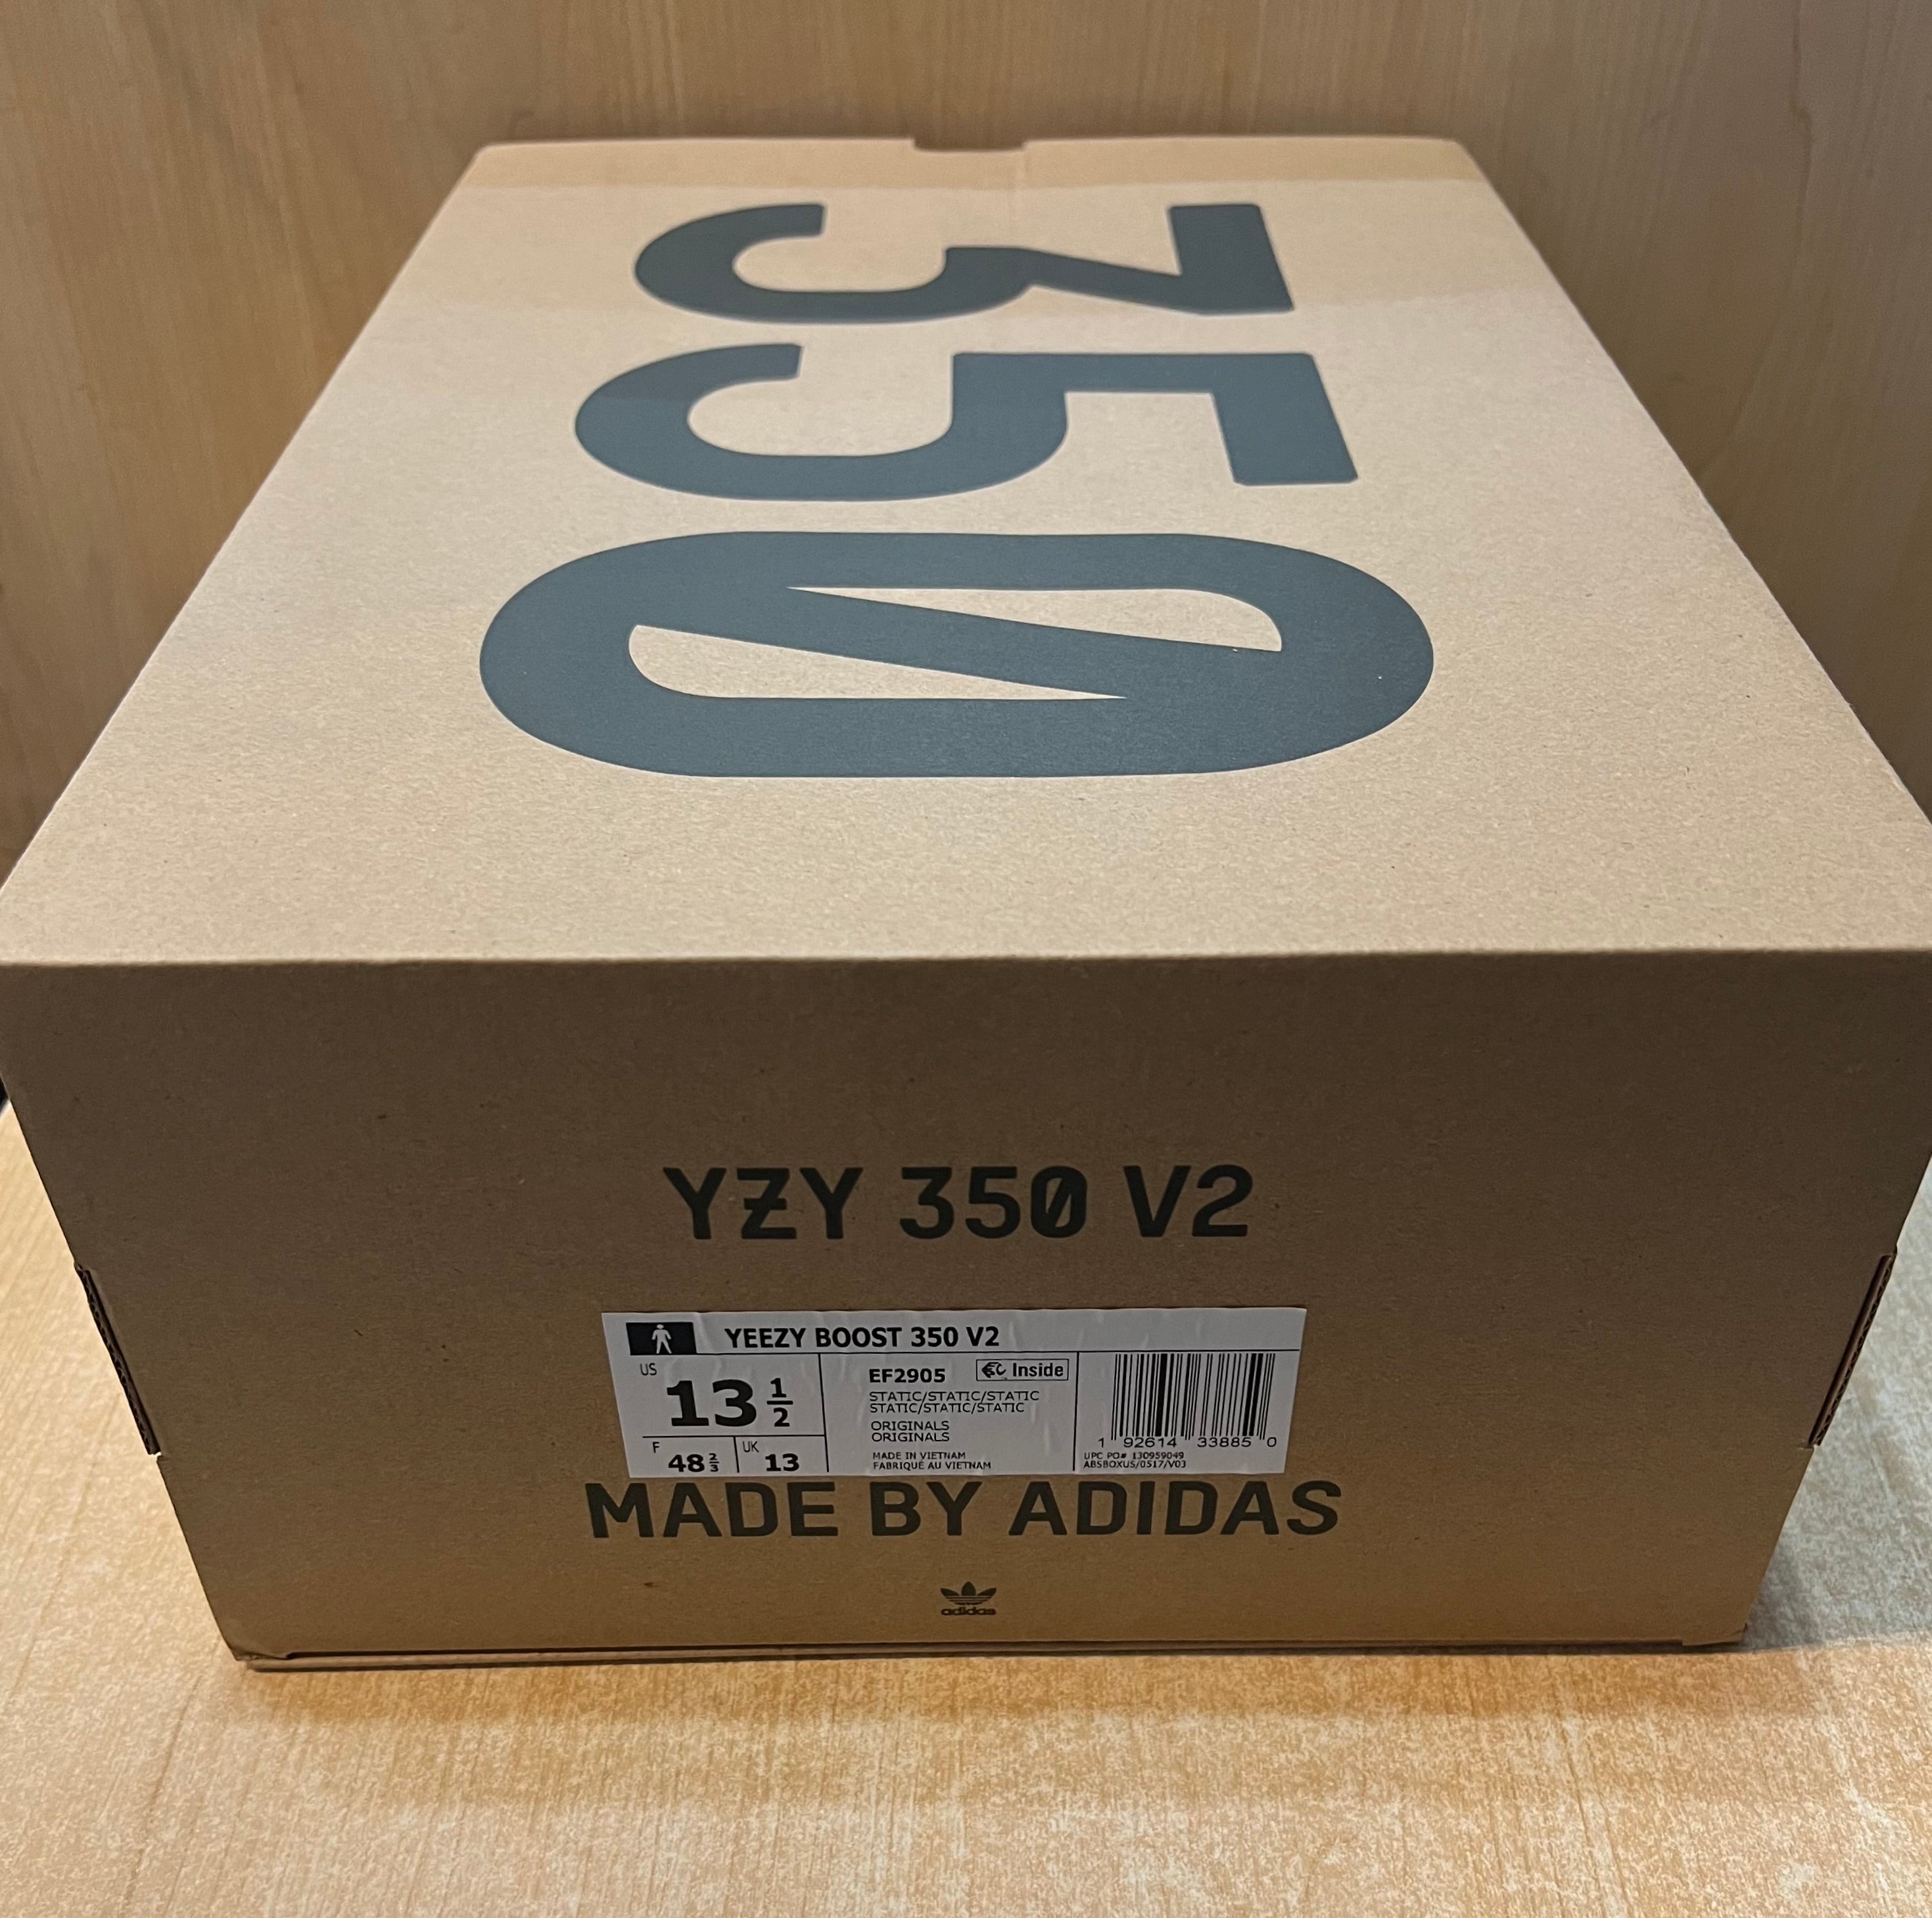 Brand New Yeezy Boost 350 V2 Static Non-Reflective Size 13.5